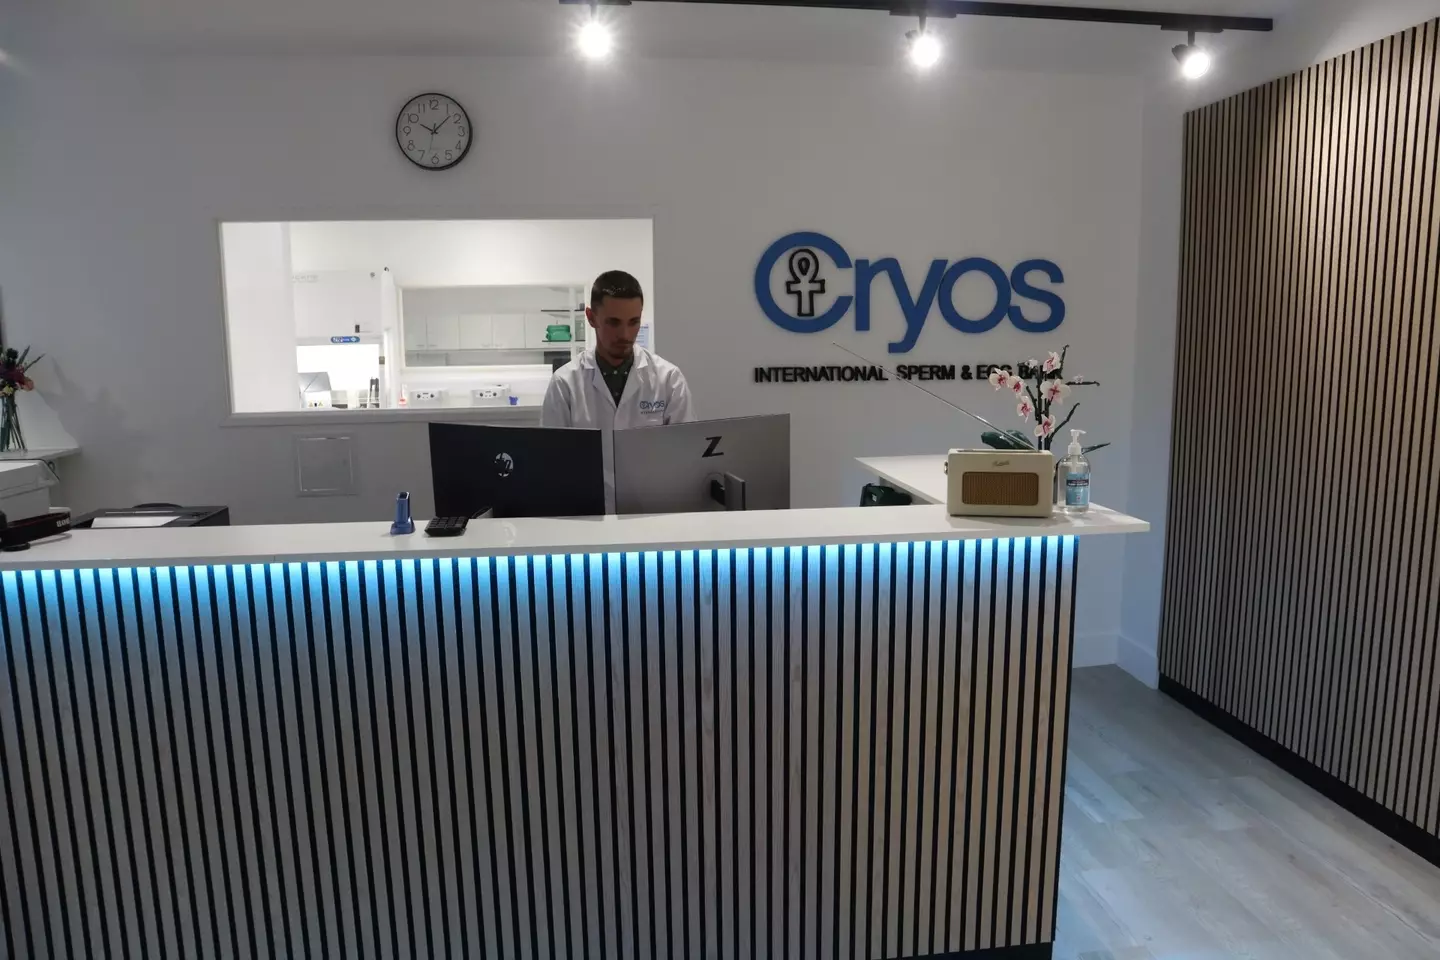 Cryos International open in Manchester. (Supplied)